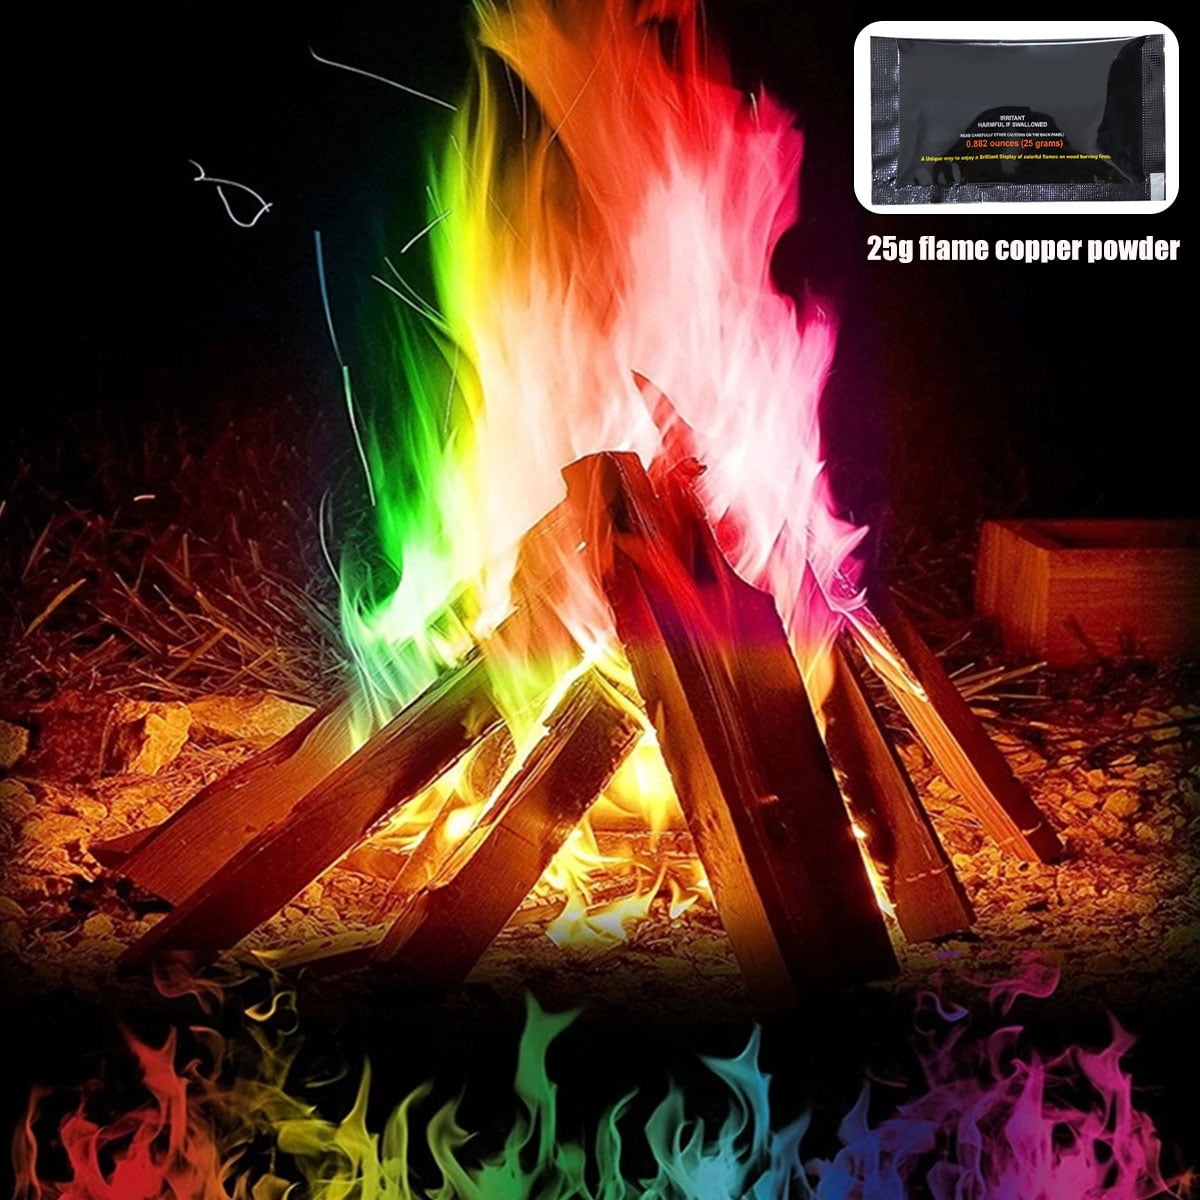 Lot of 4 Enviro Log Color Flame 3 Pack Boxes Add Amazing Color to Wood Fire Camp 